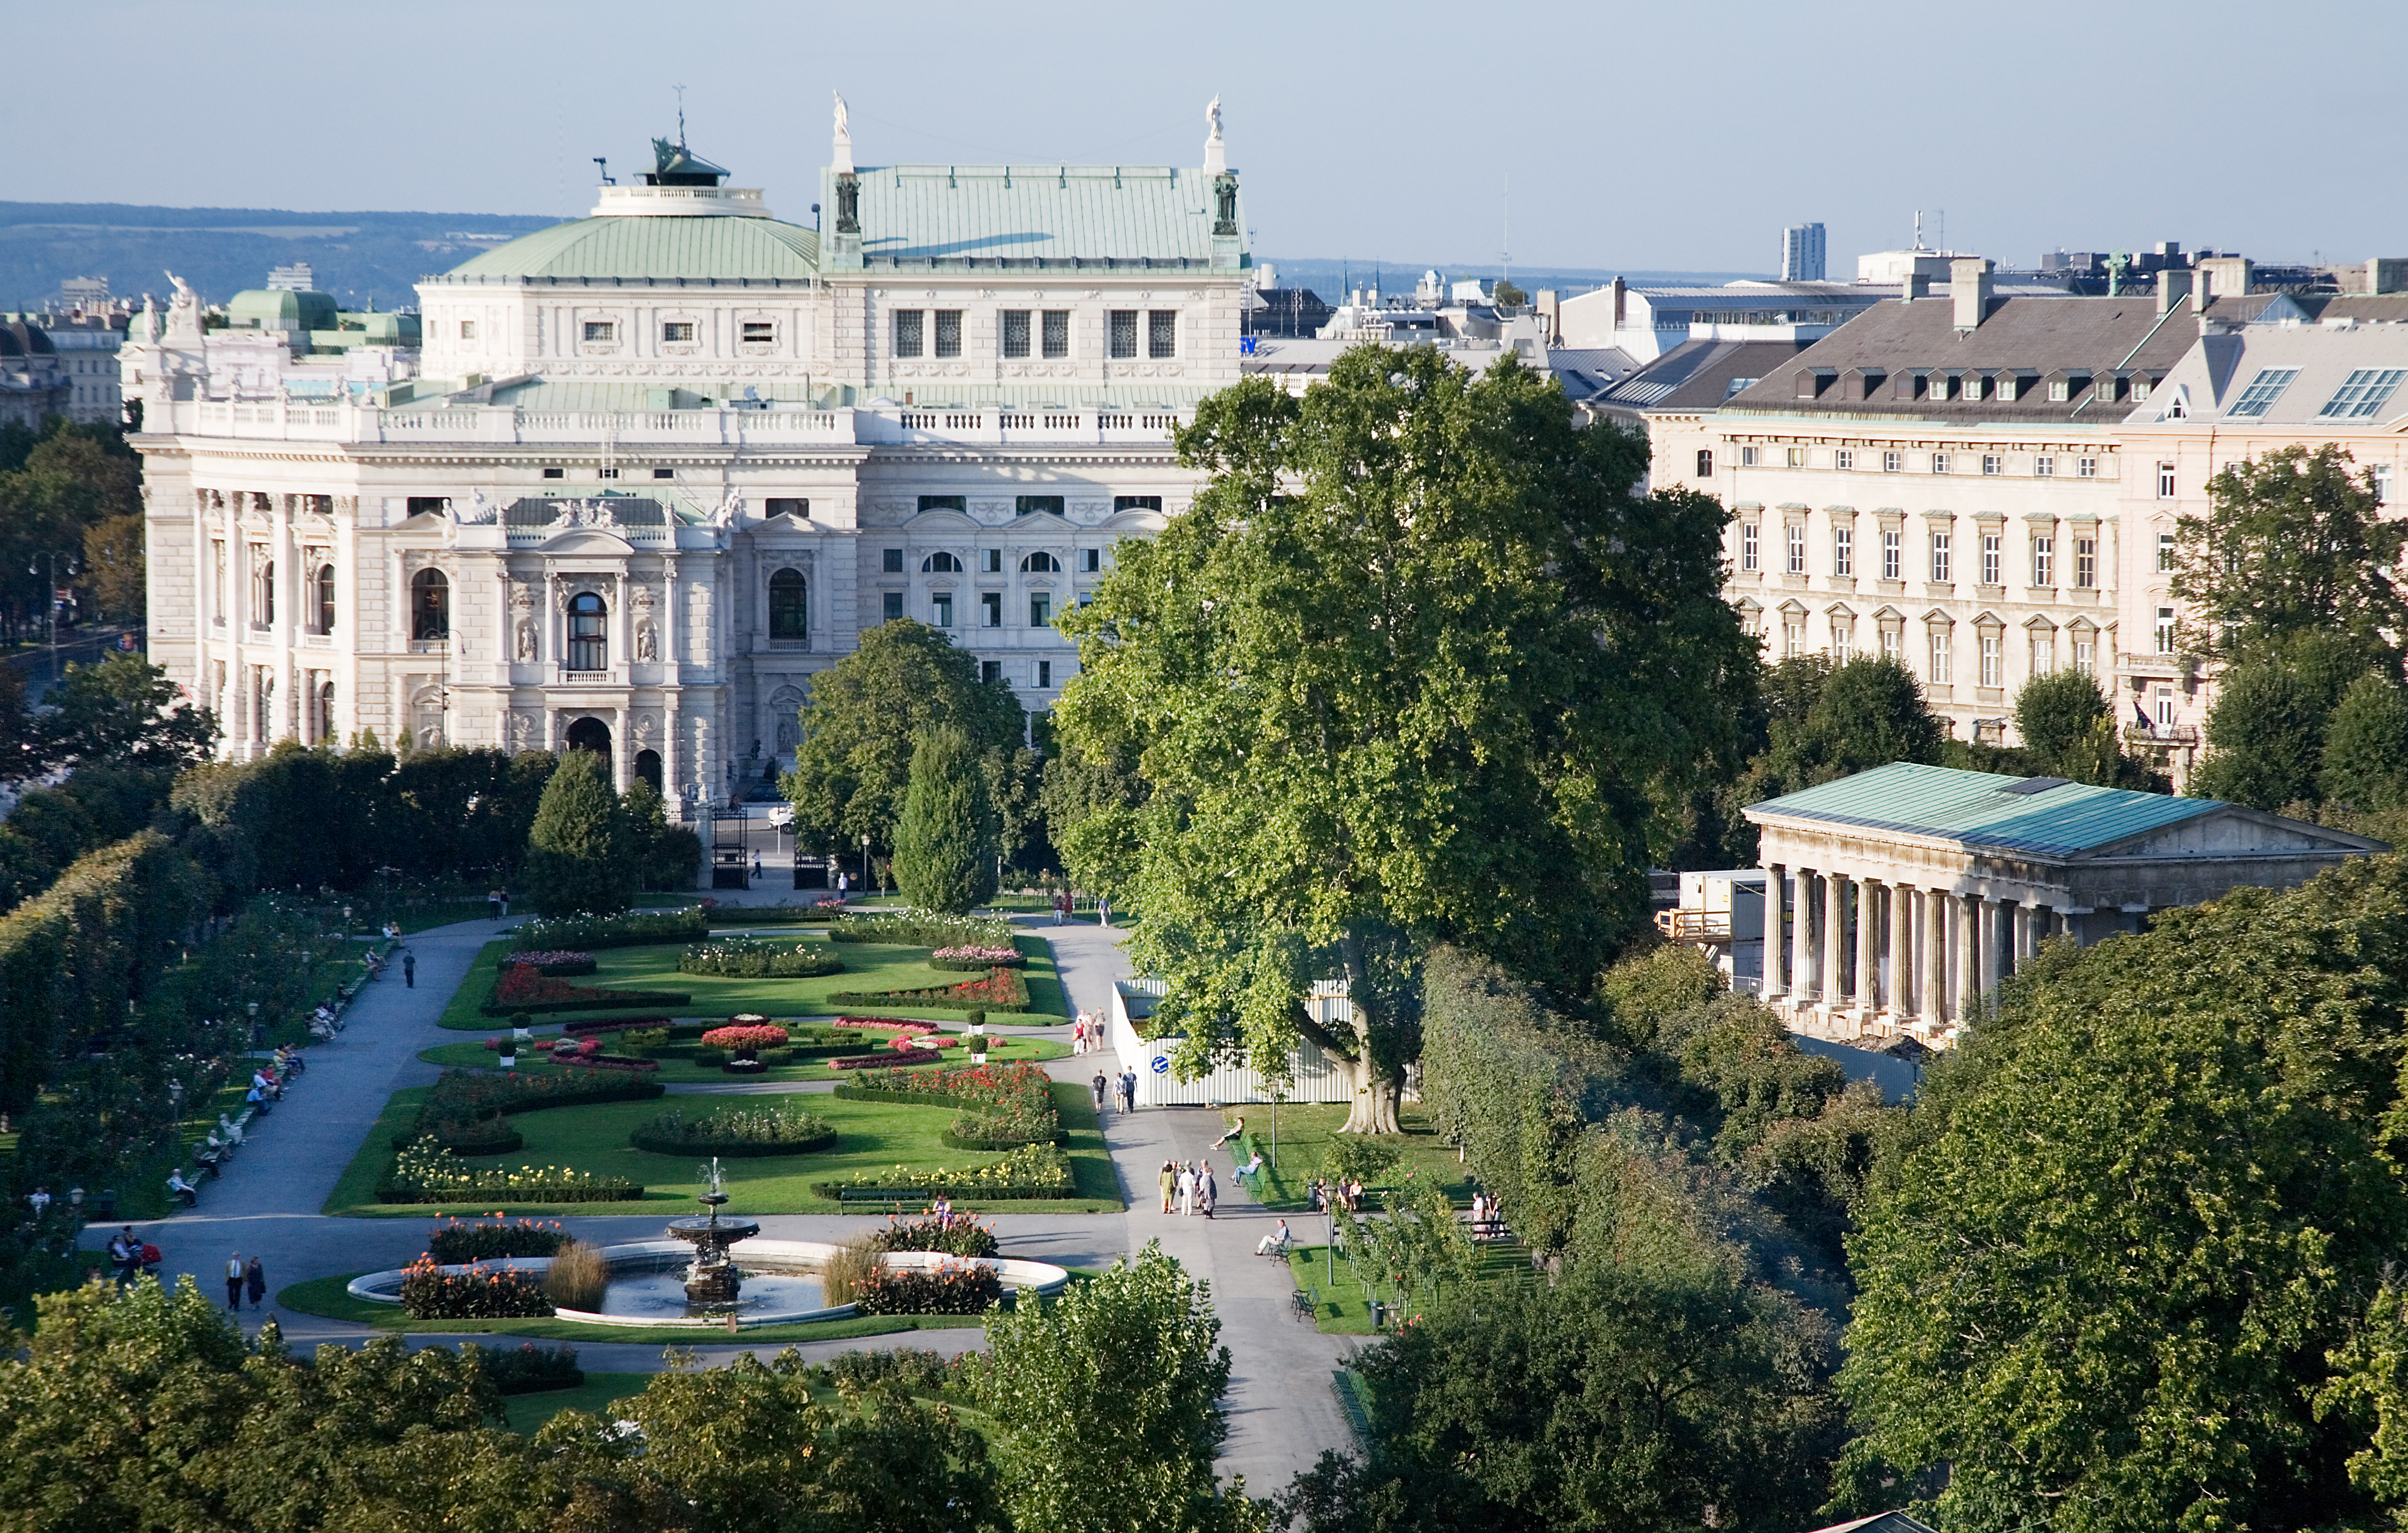 View of the Burgtheater and Volksgarten from the Naturhistorisches Museum (Museum of Natural History), Vienna, Austria. Photo taken by Jorge Royan on September 6, 2008.